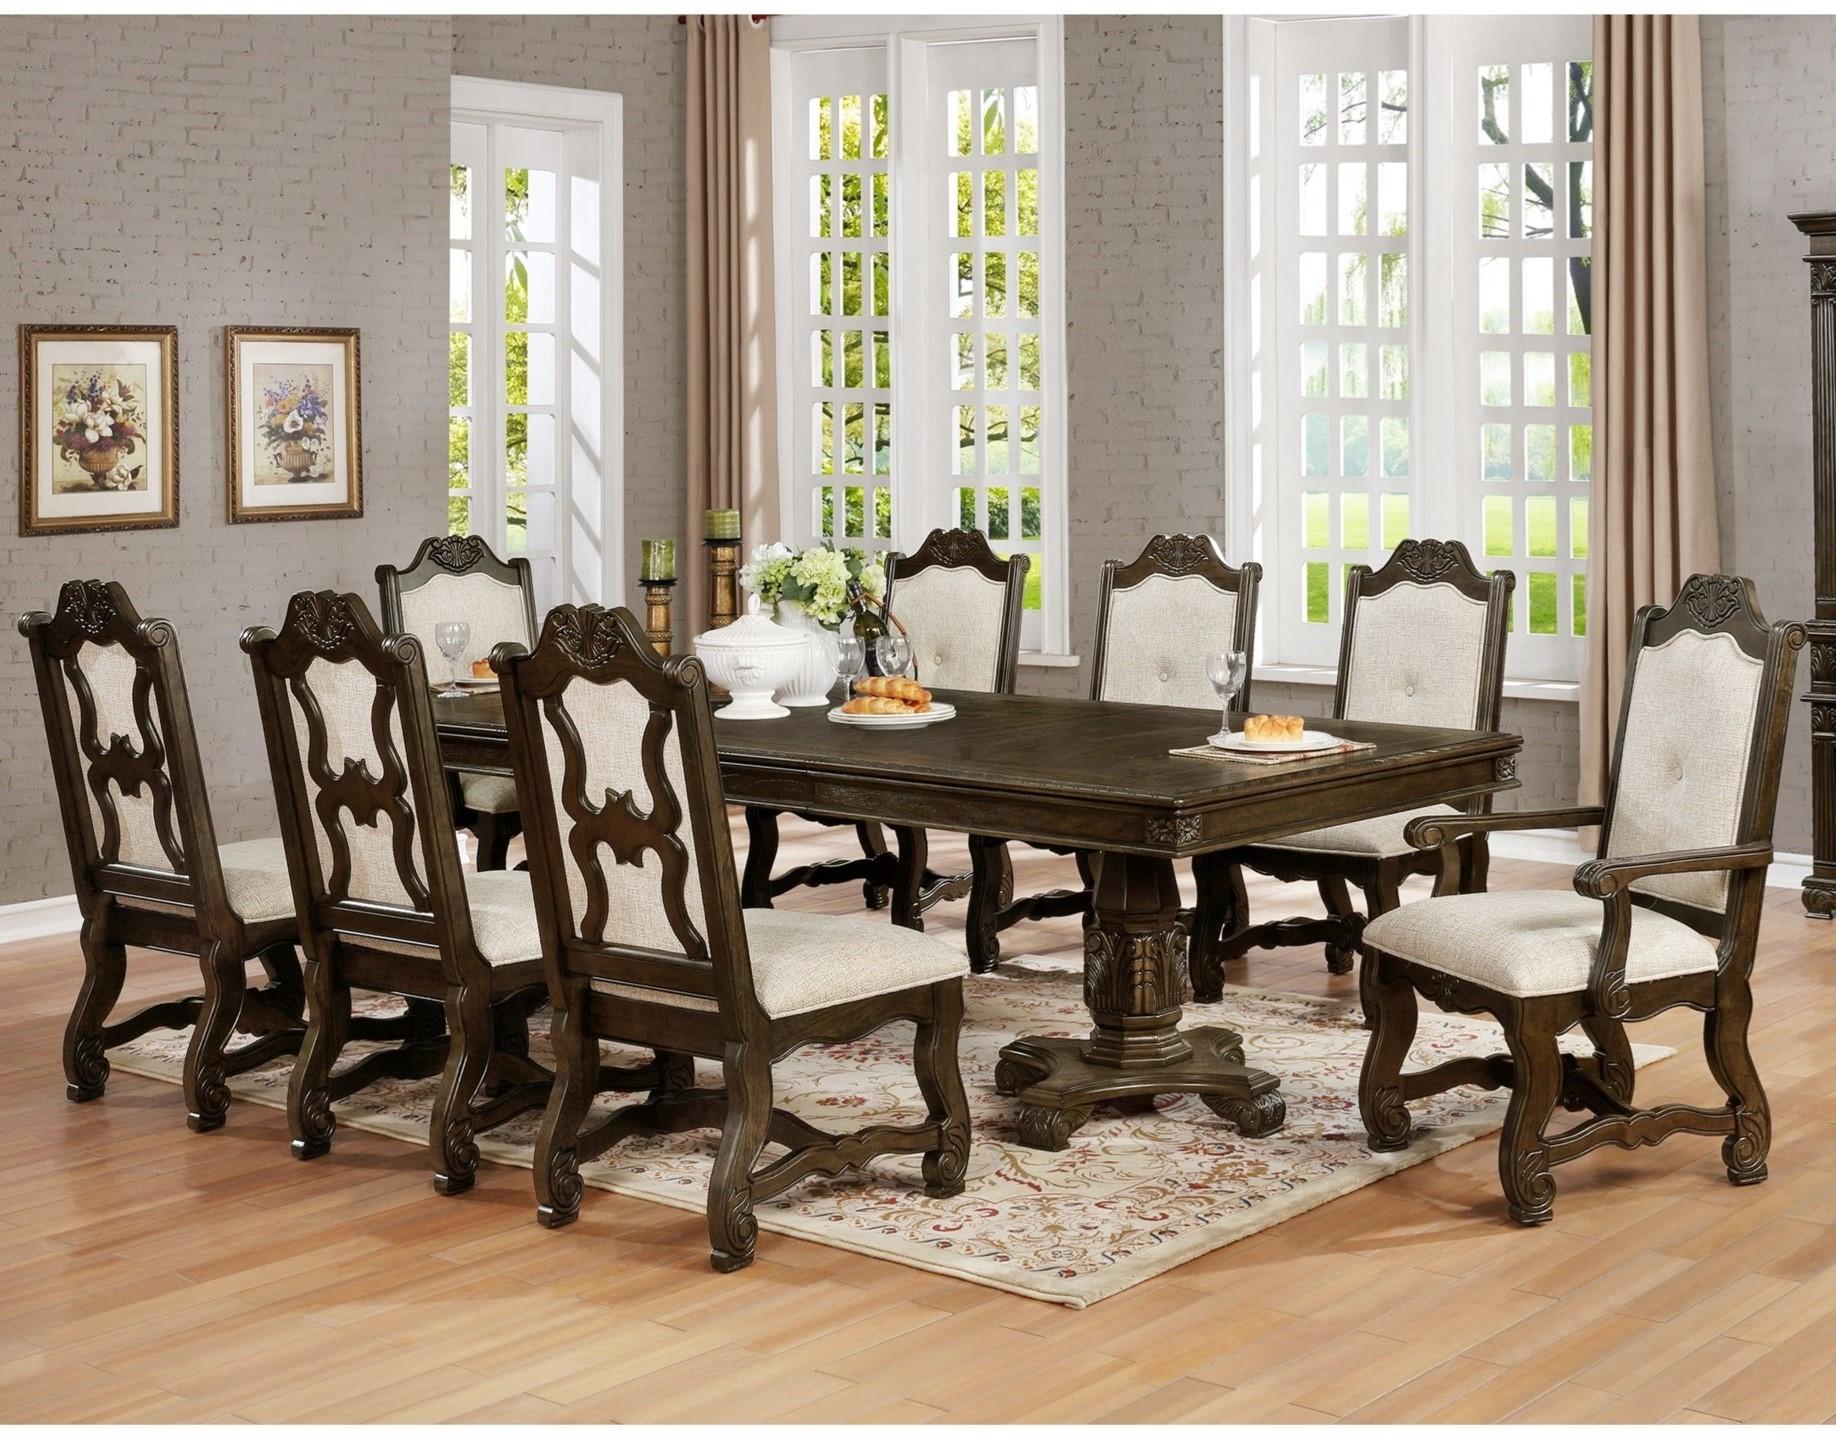 

    
Rustic Brown Dining Table + 8 Chairs by Crown Mark Neo Renaissance 2420T-44108-9pcs
